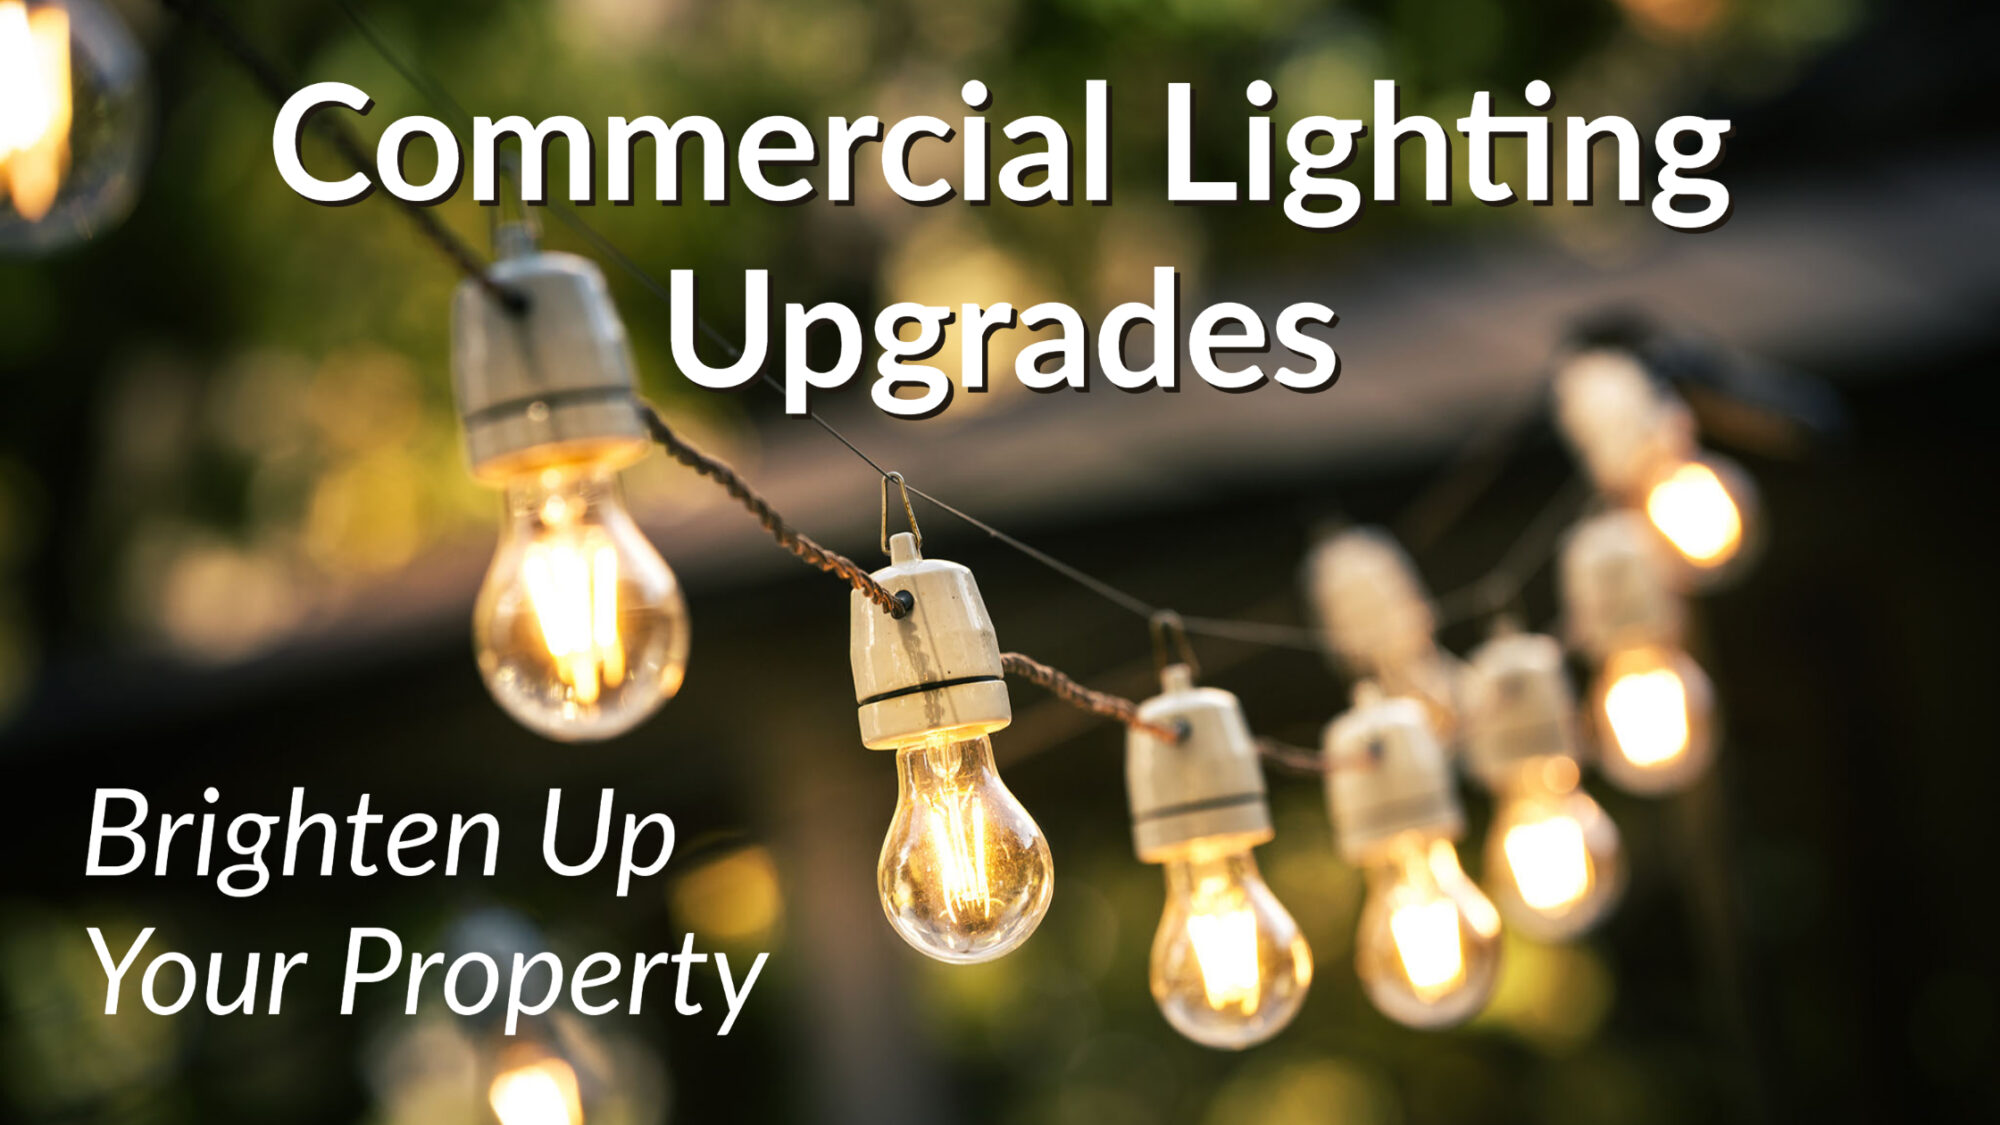 Commercial Lighting Upgrades